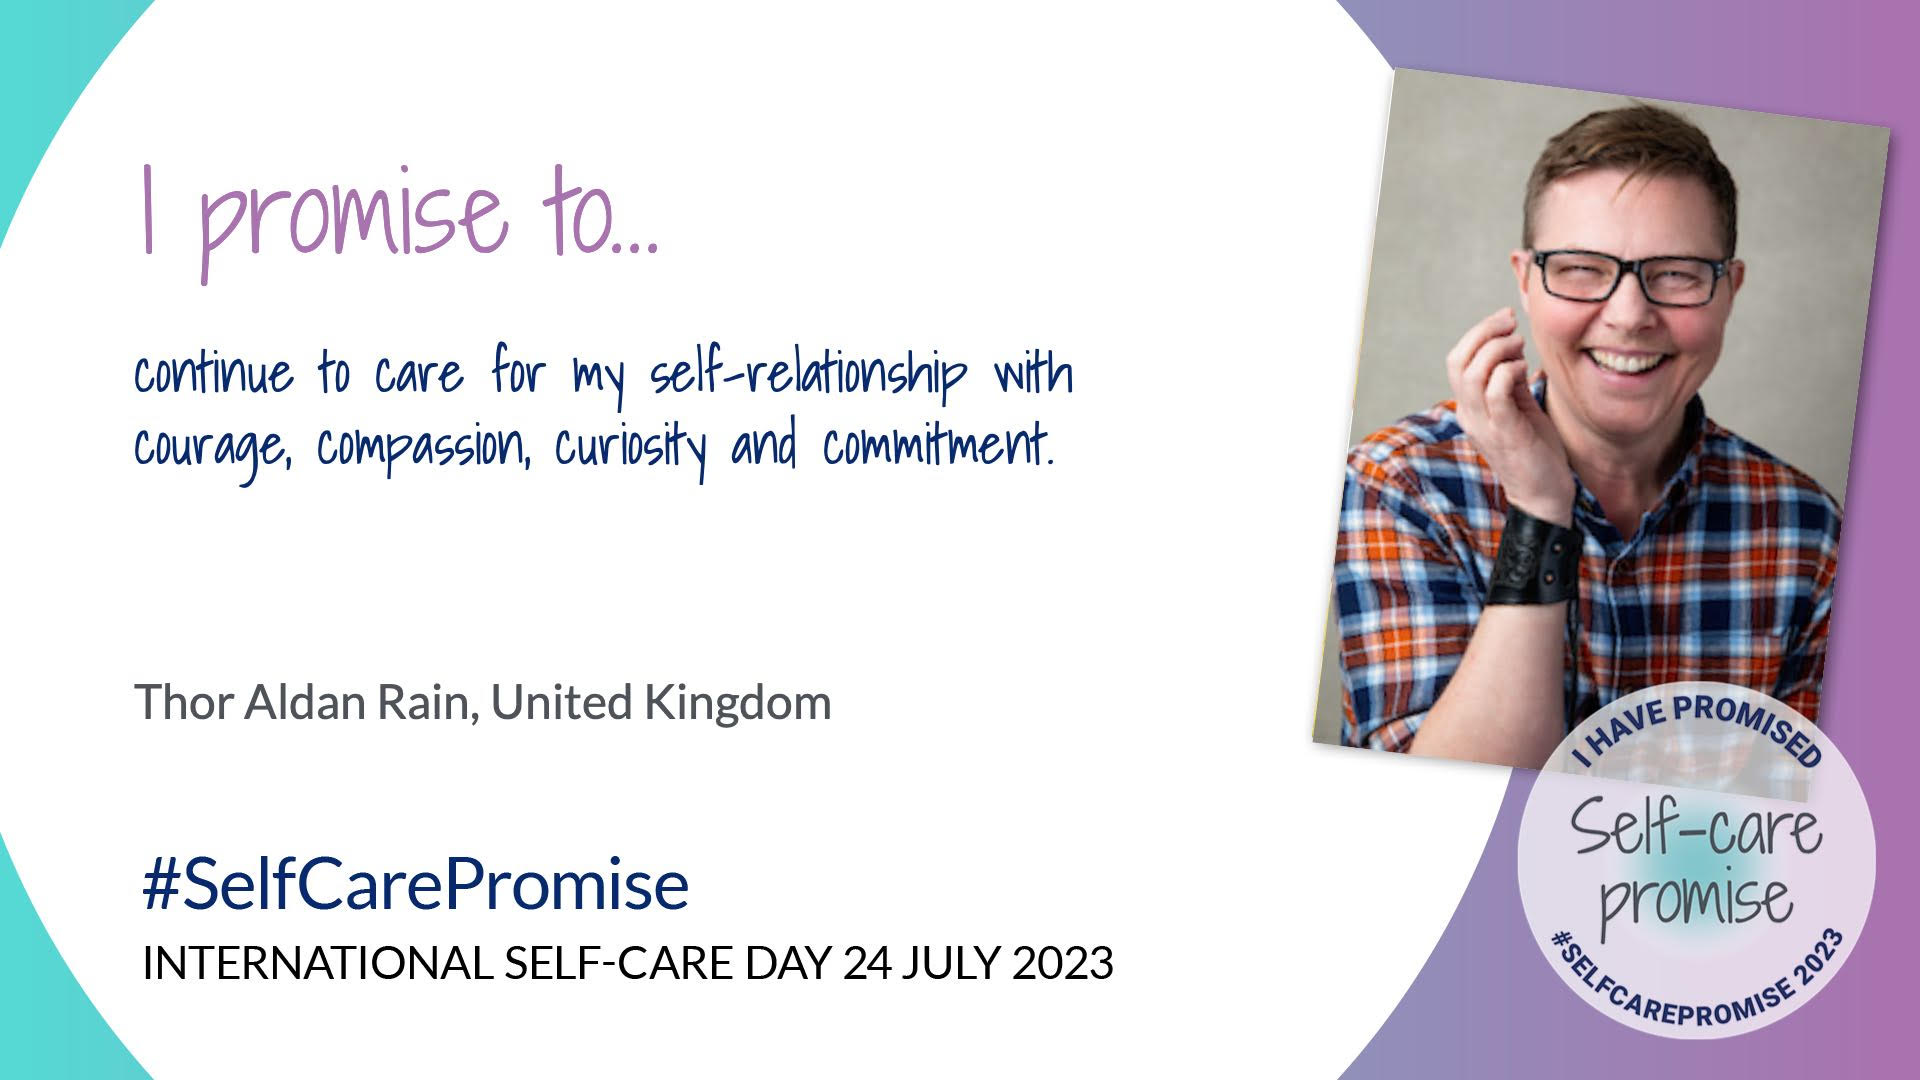 An image of Thor outlining their self-care promise, which reads: "I promise to continue to care for my self-relationship with courage, compassion, curiosity and commitment". #selfcarepromise International Self-Care Day, 24 July 2023